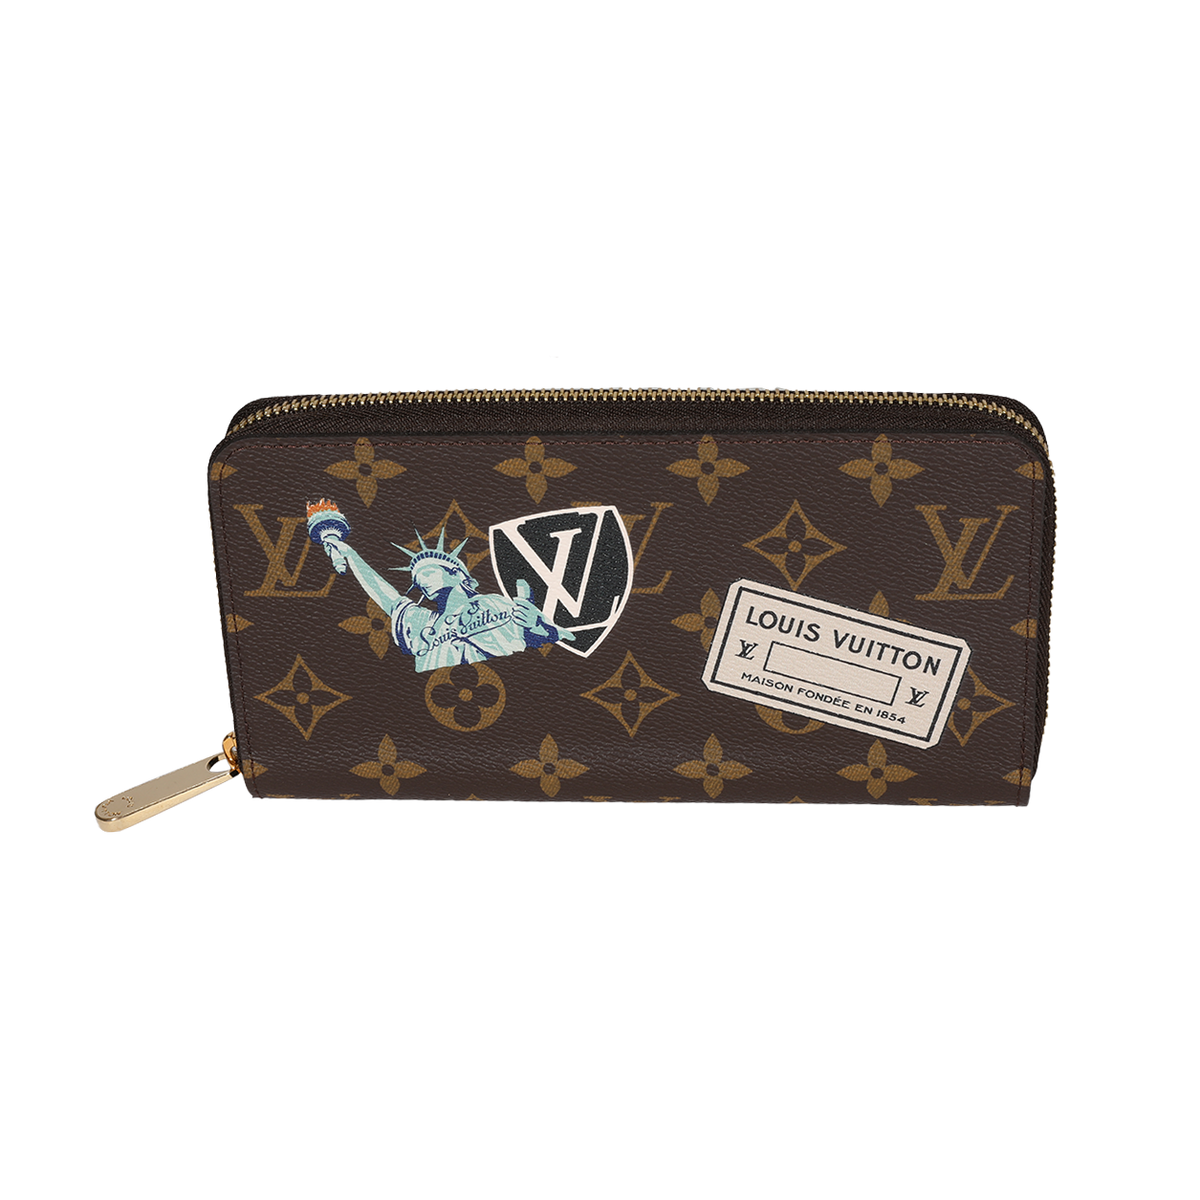 GIFTS FOR YOUR GUY! Louis Vuitton Wallet For Men - Louis Vuitton Wallet  Review! LV Wallet! 